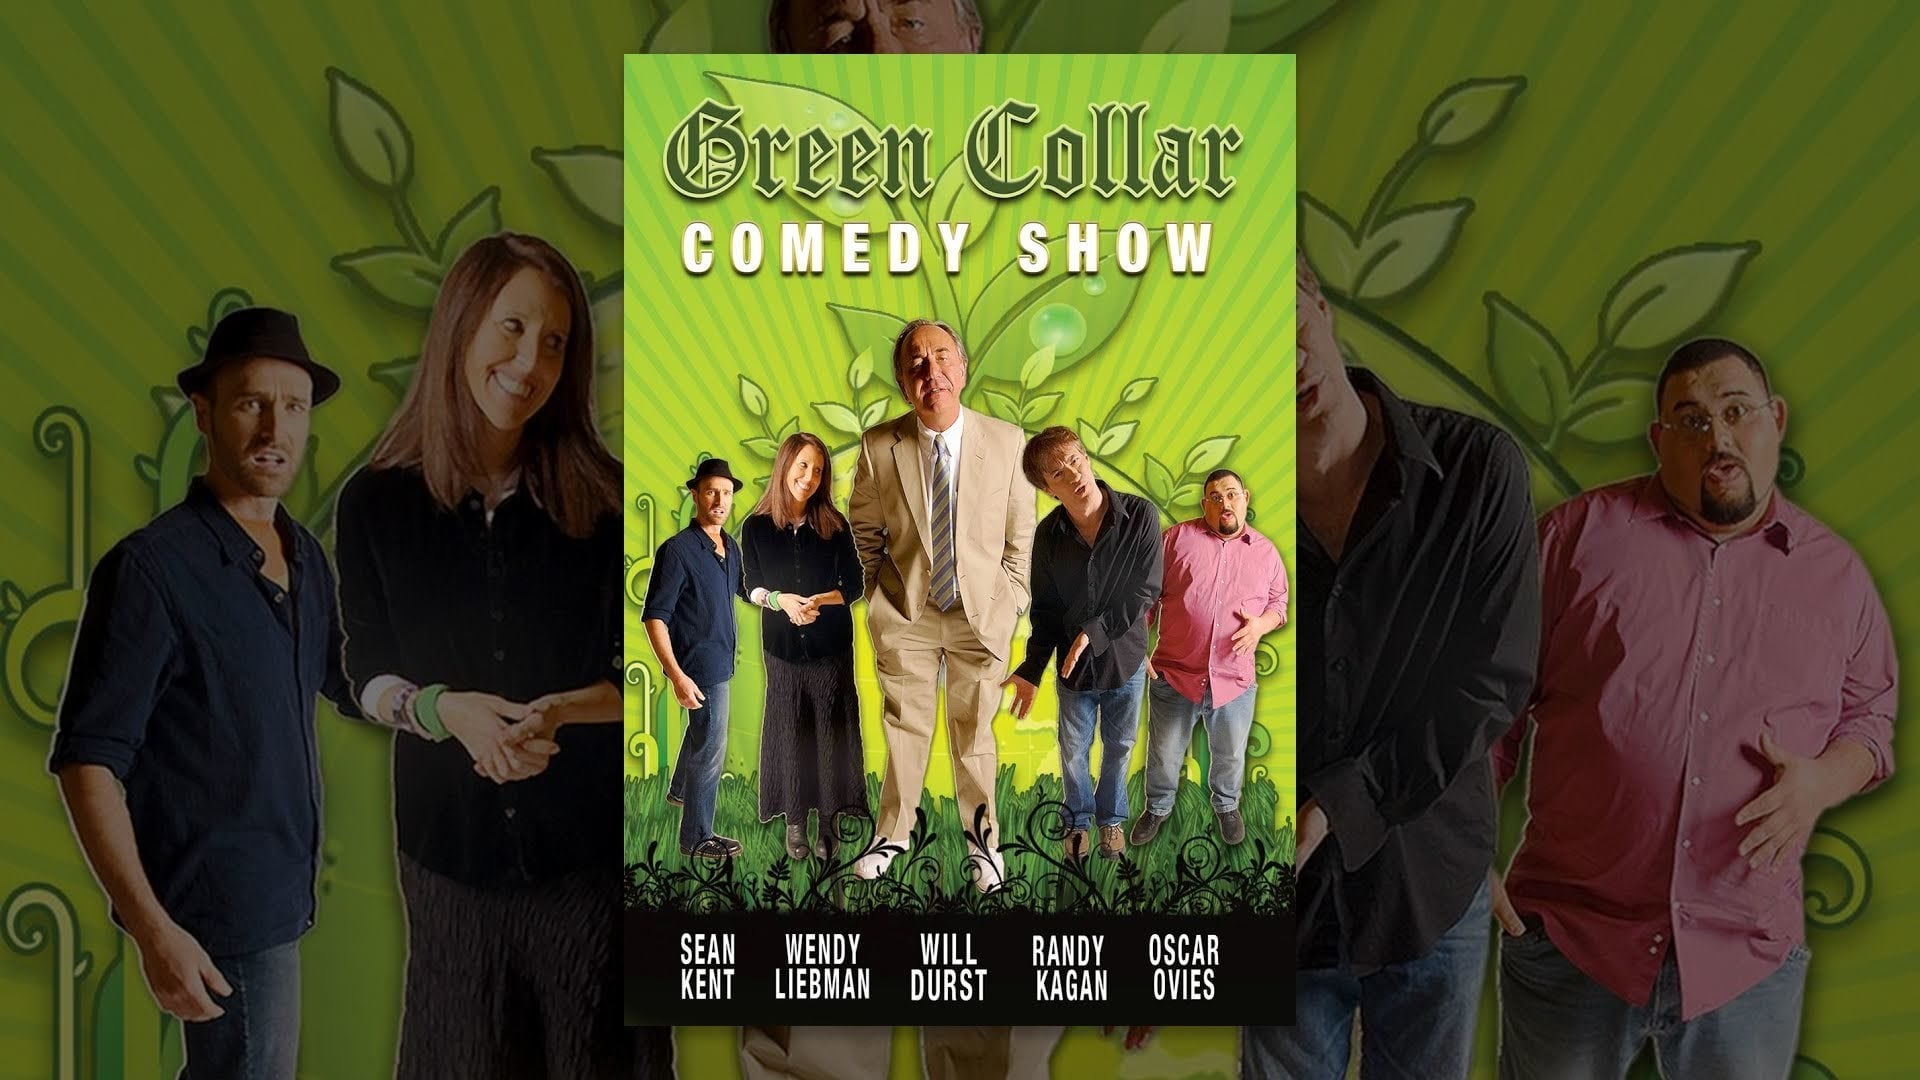 Green Collar Comedy Show 2010 123movies